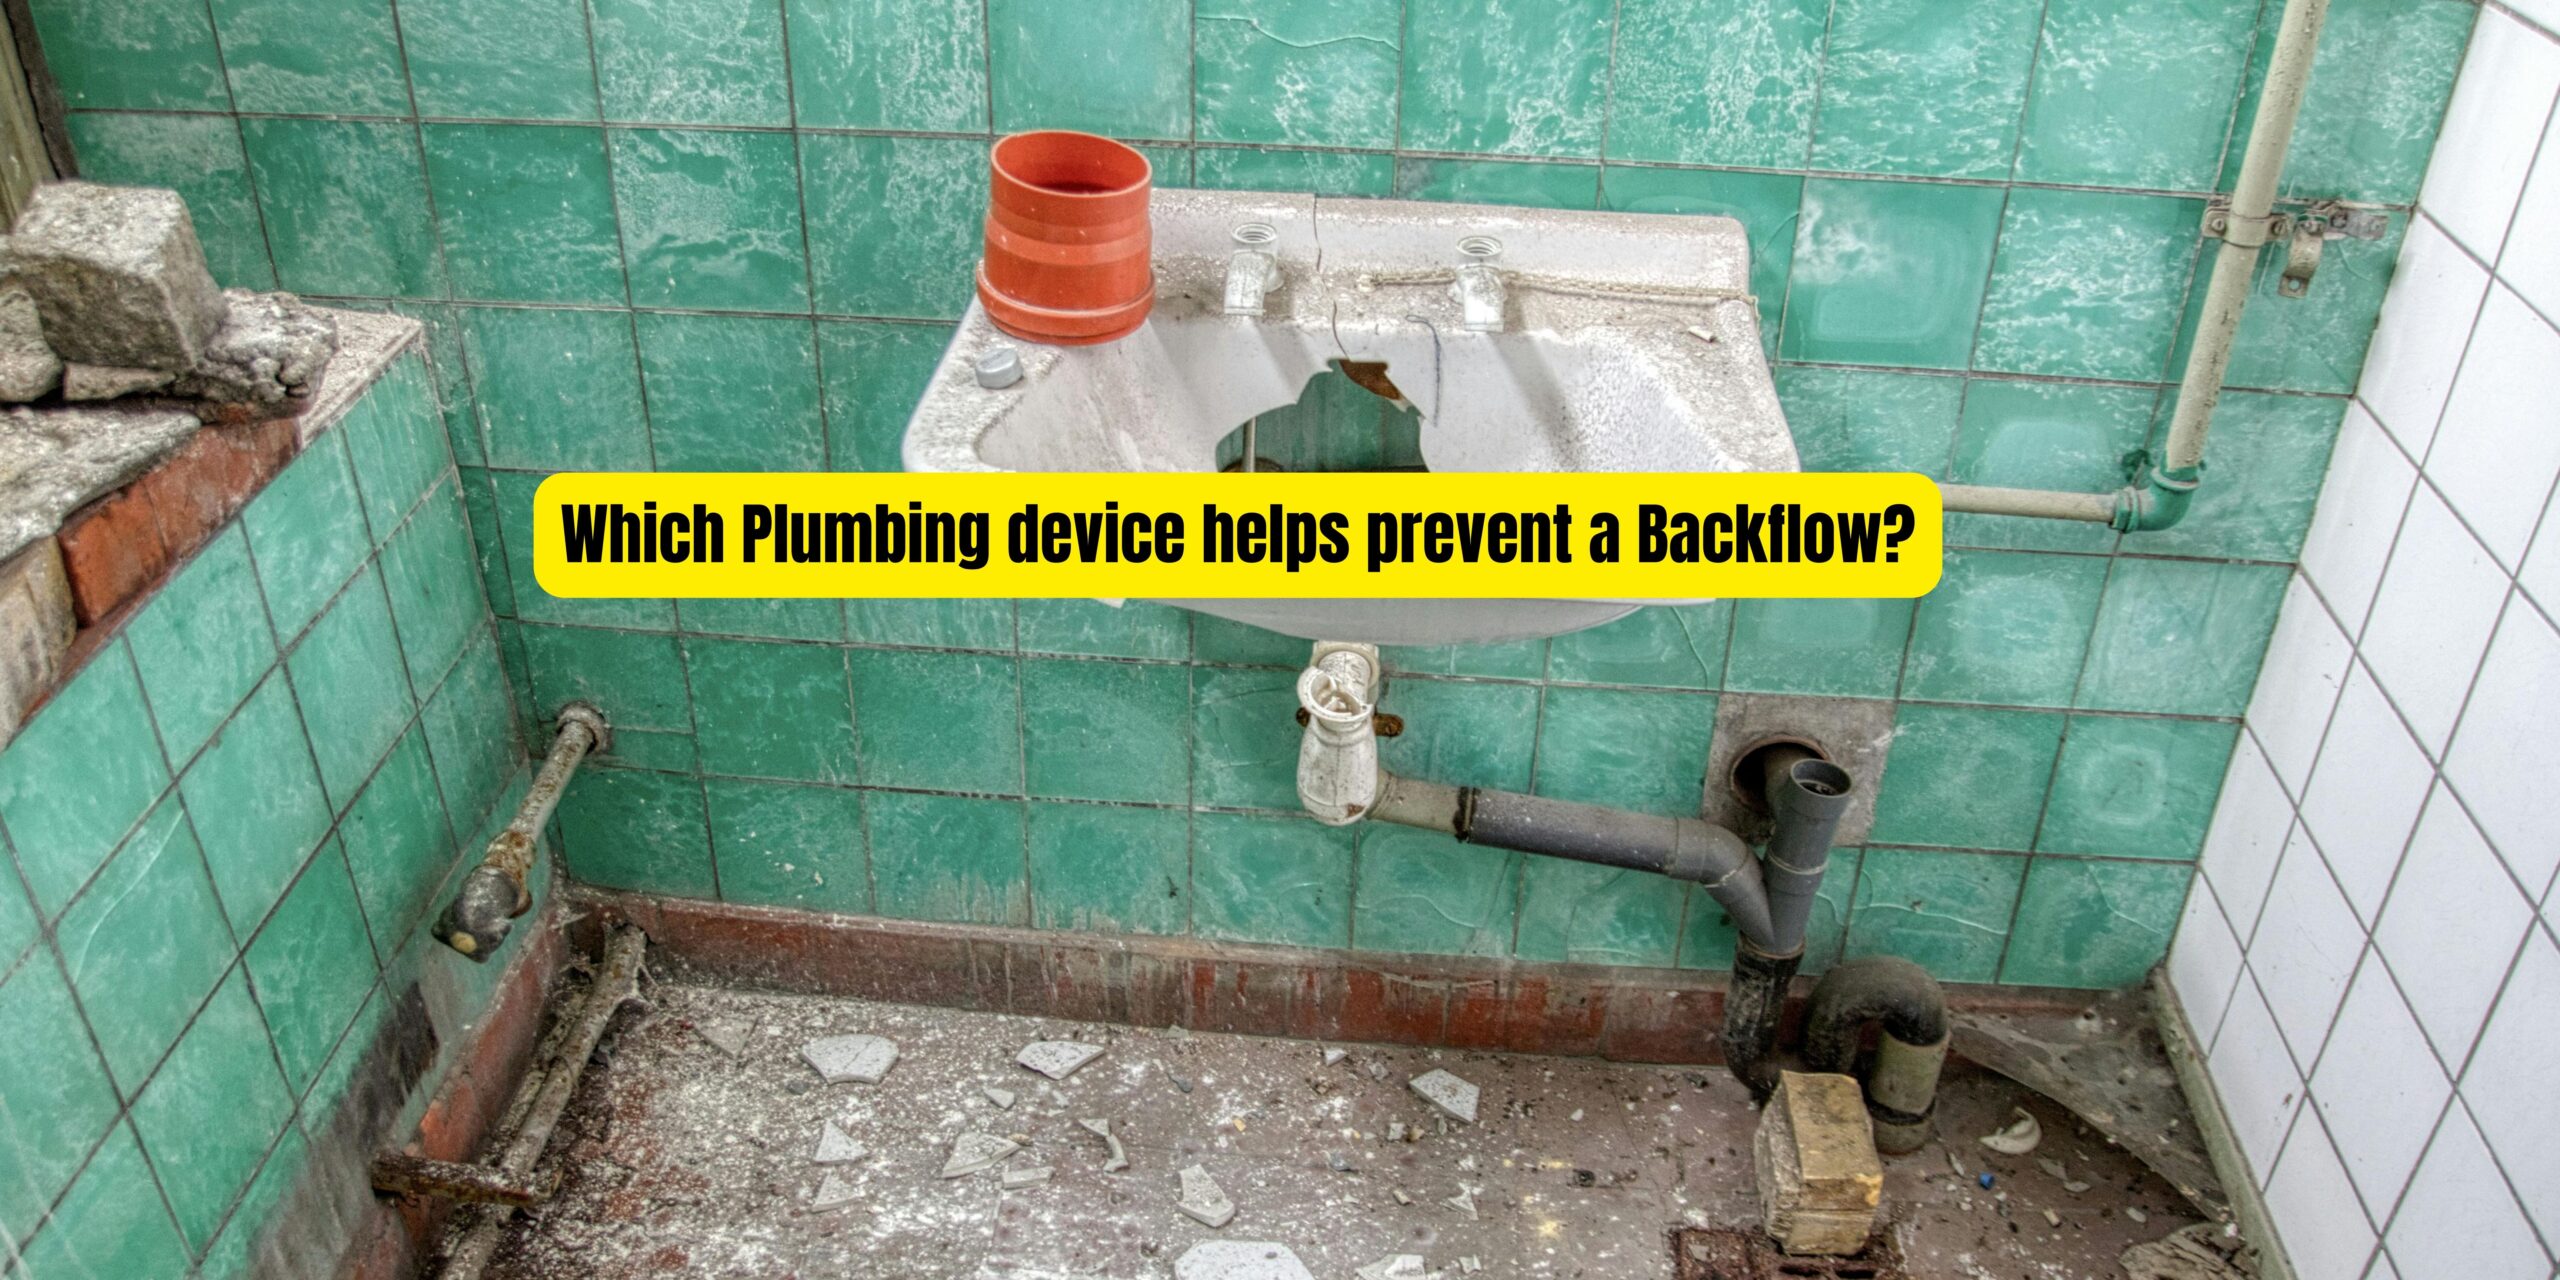 Which plumbing device helps prevent a backflow